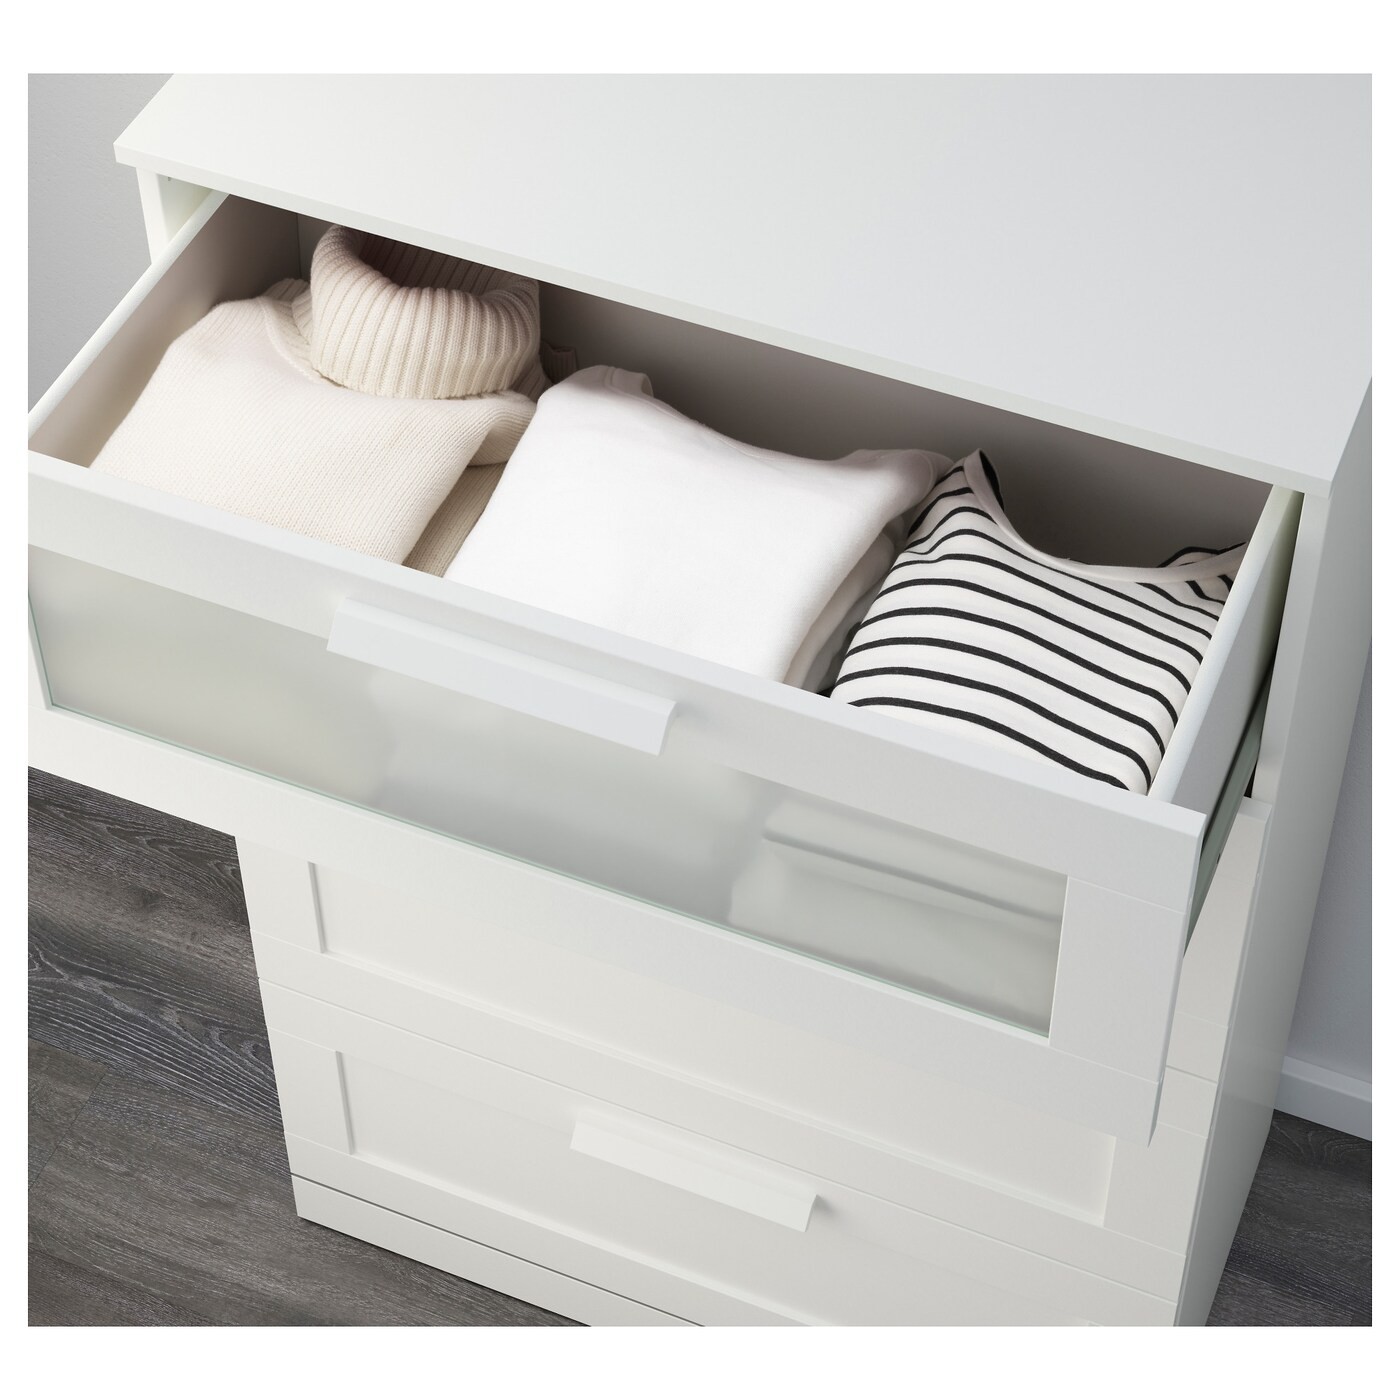 BRIMNES Chest of 4 drawers